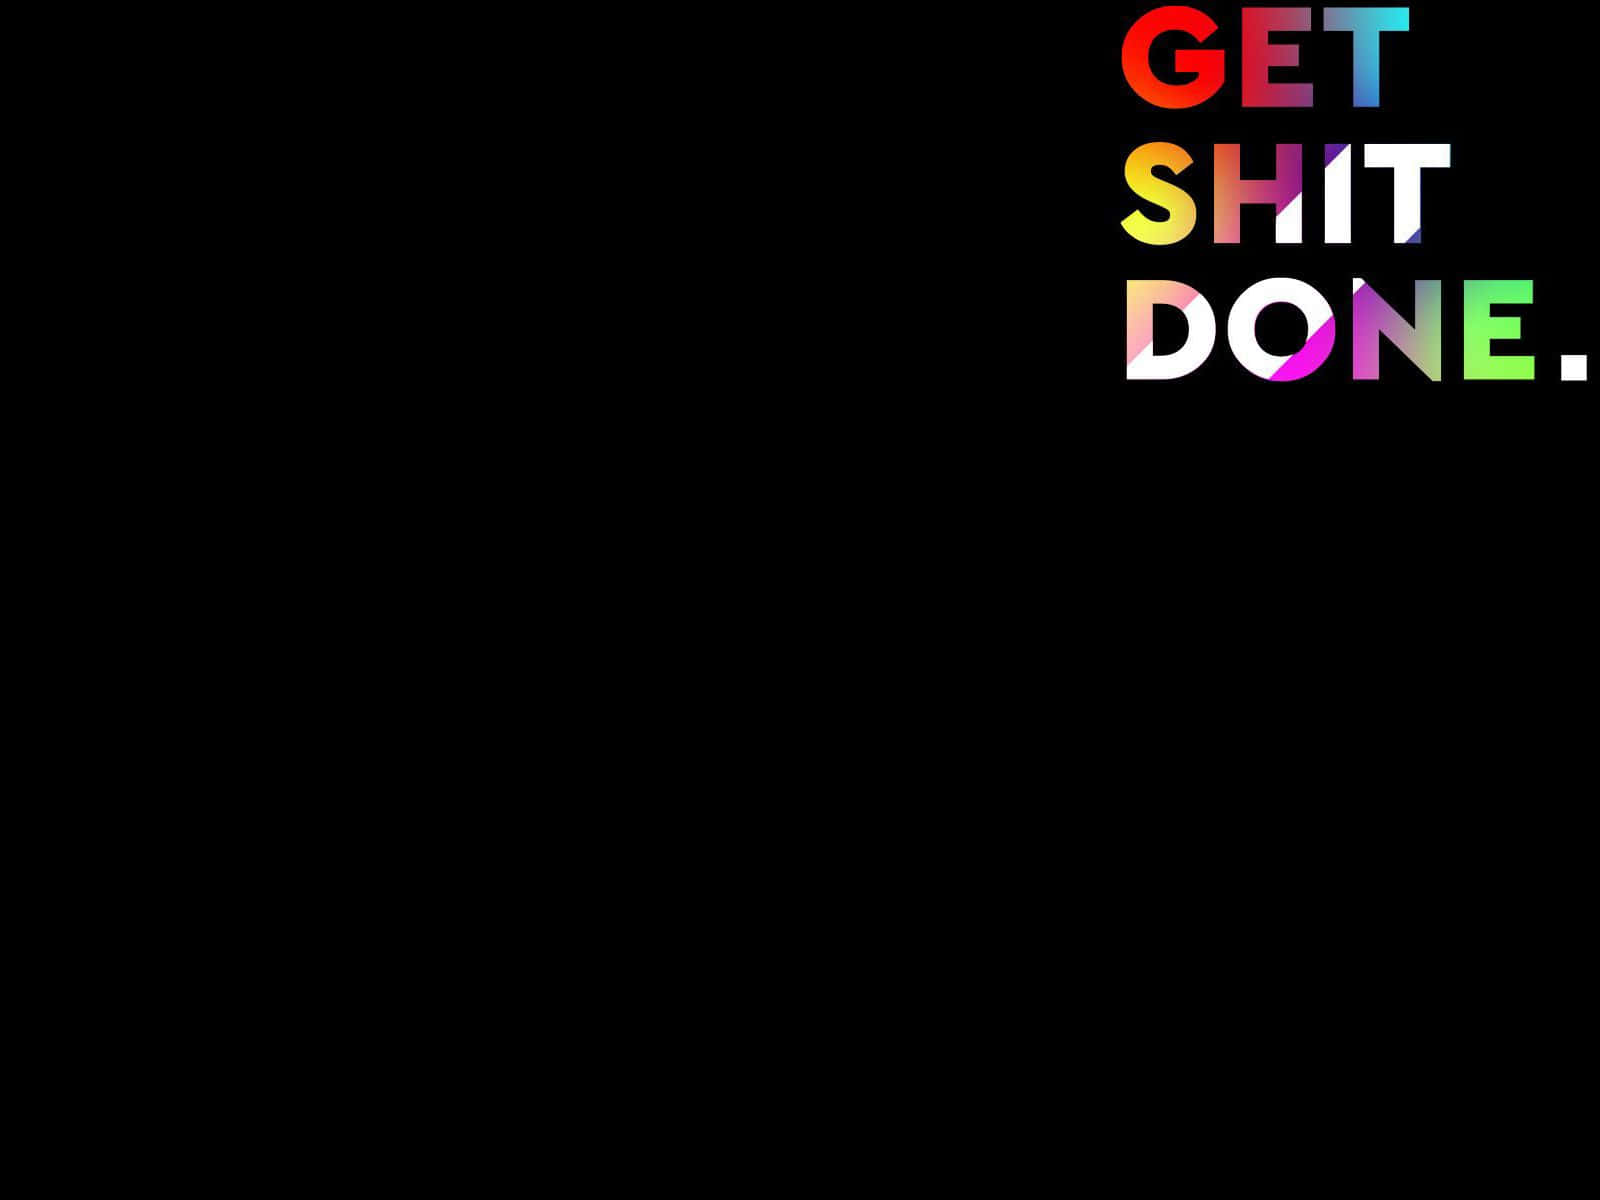 https://wallpapers.com/images/hd/get-shit-done-7umn3h6pwk3yjoia.jpg